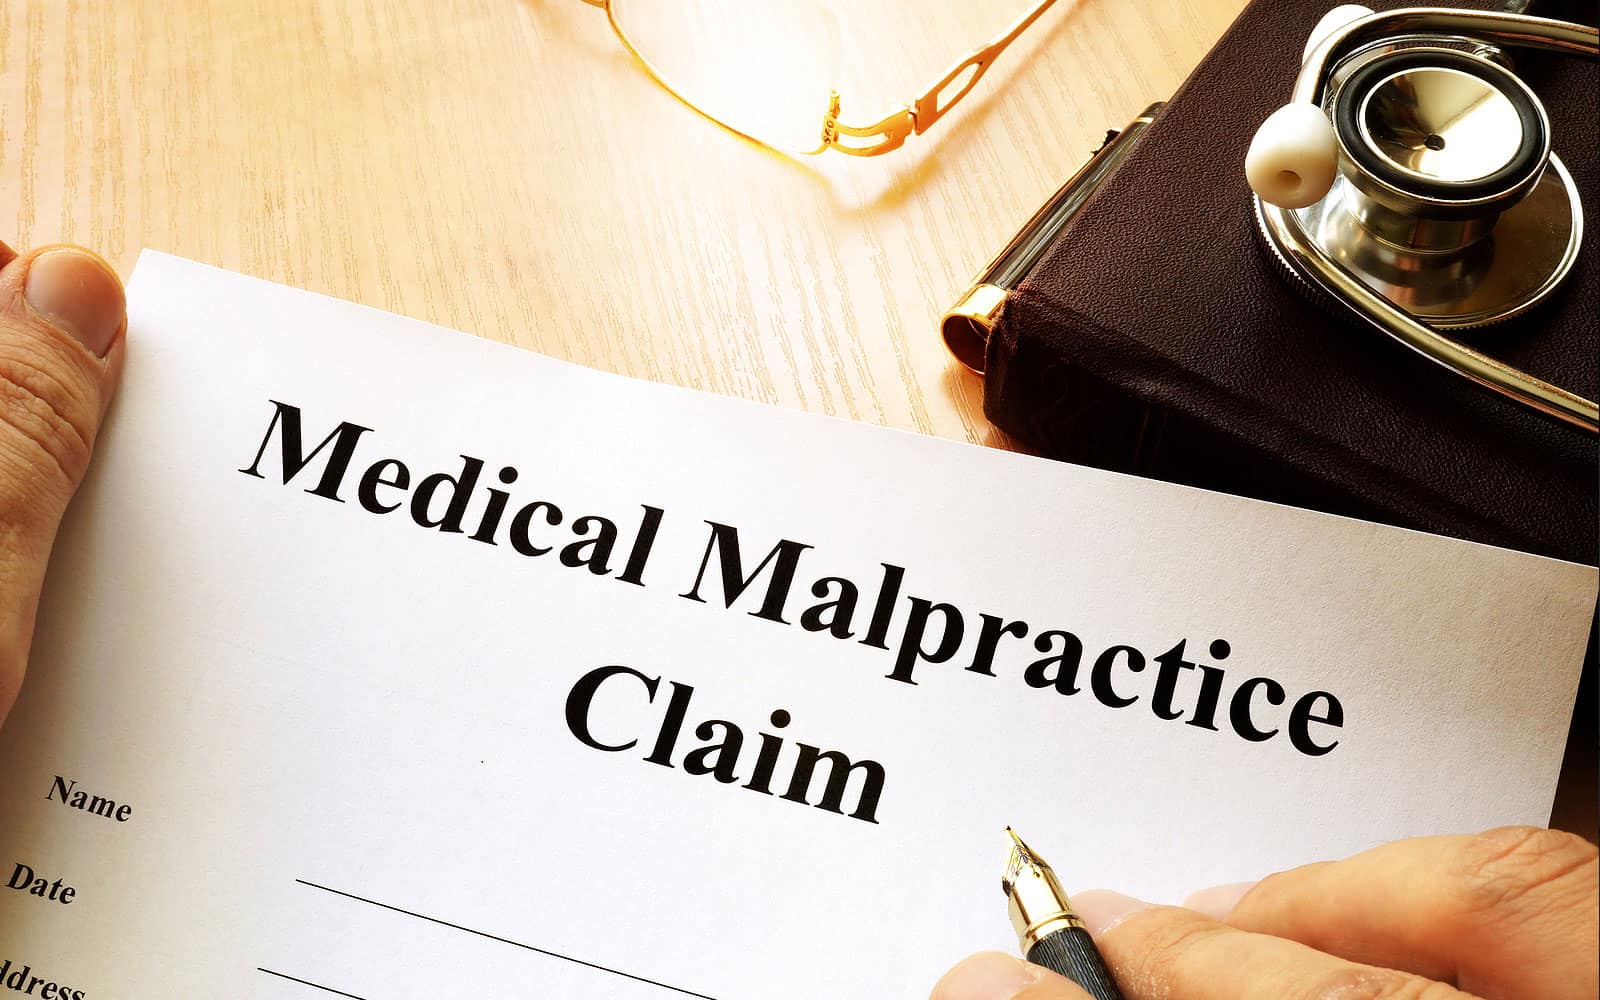 Know about medical malpractice and the common issues that occur in medical negligence